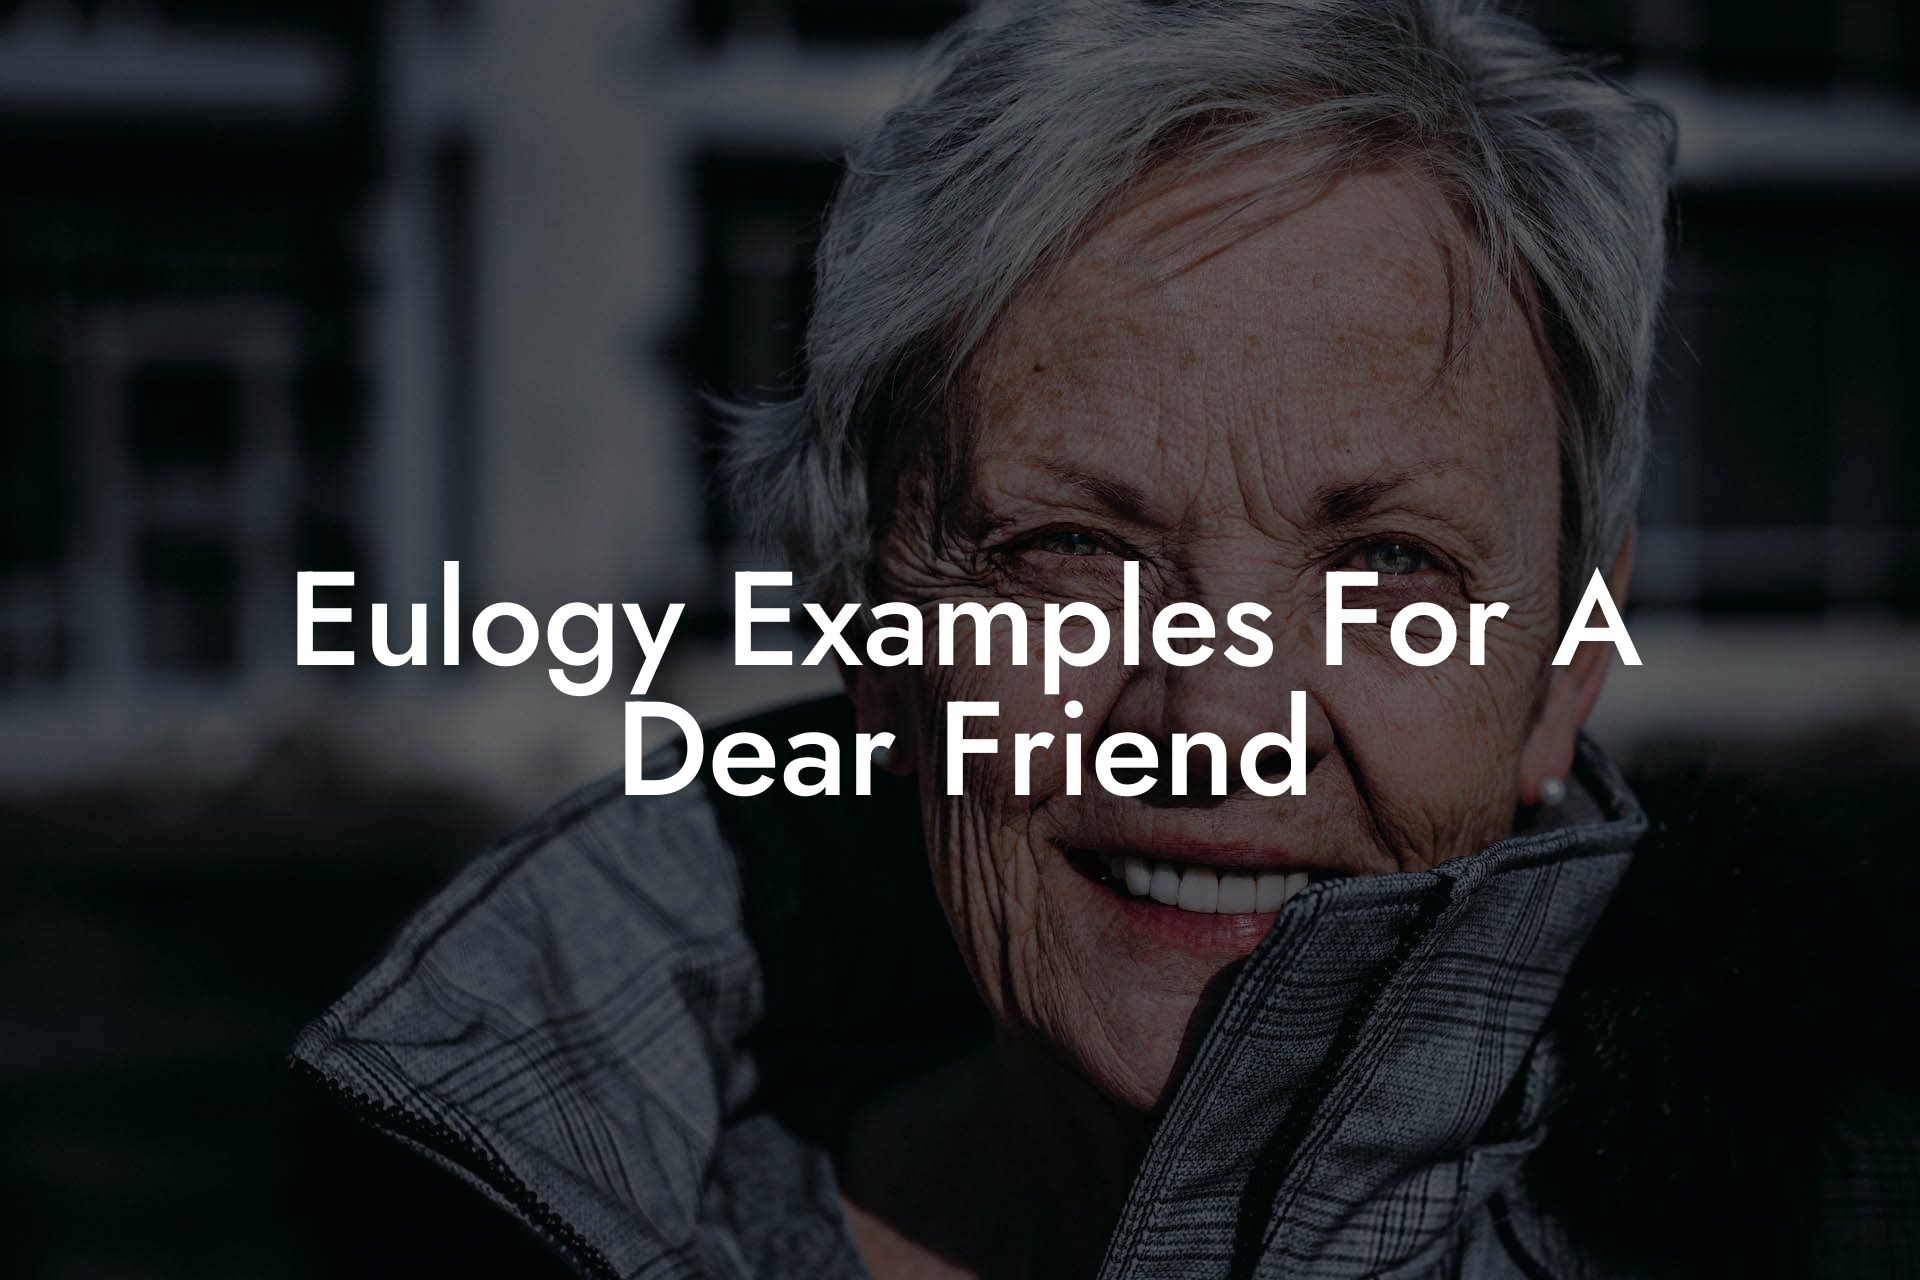 Eulogy Examples For A Dear Friend